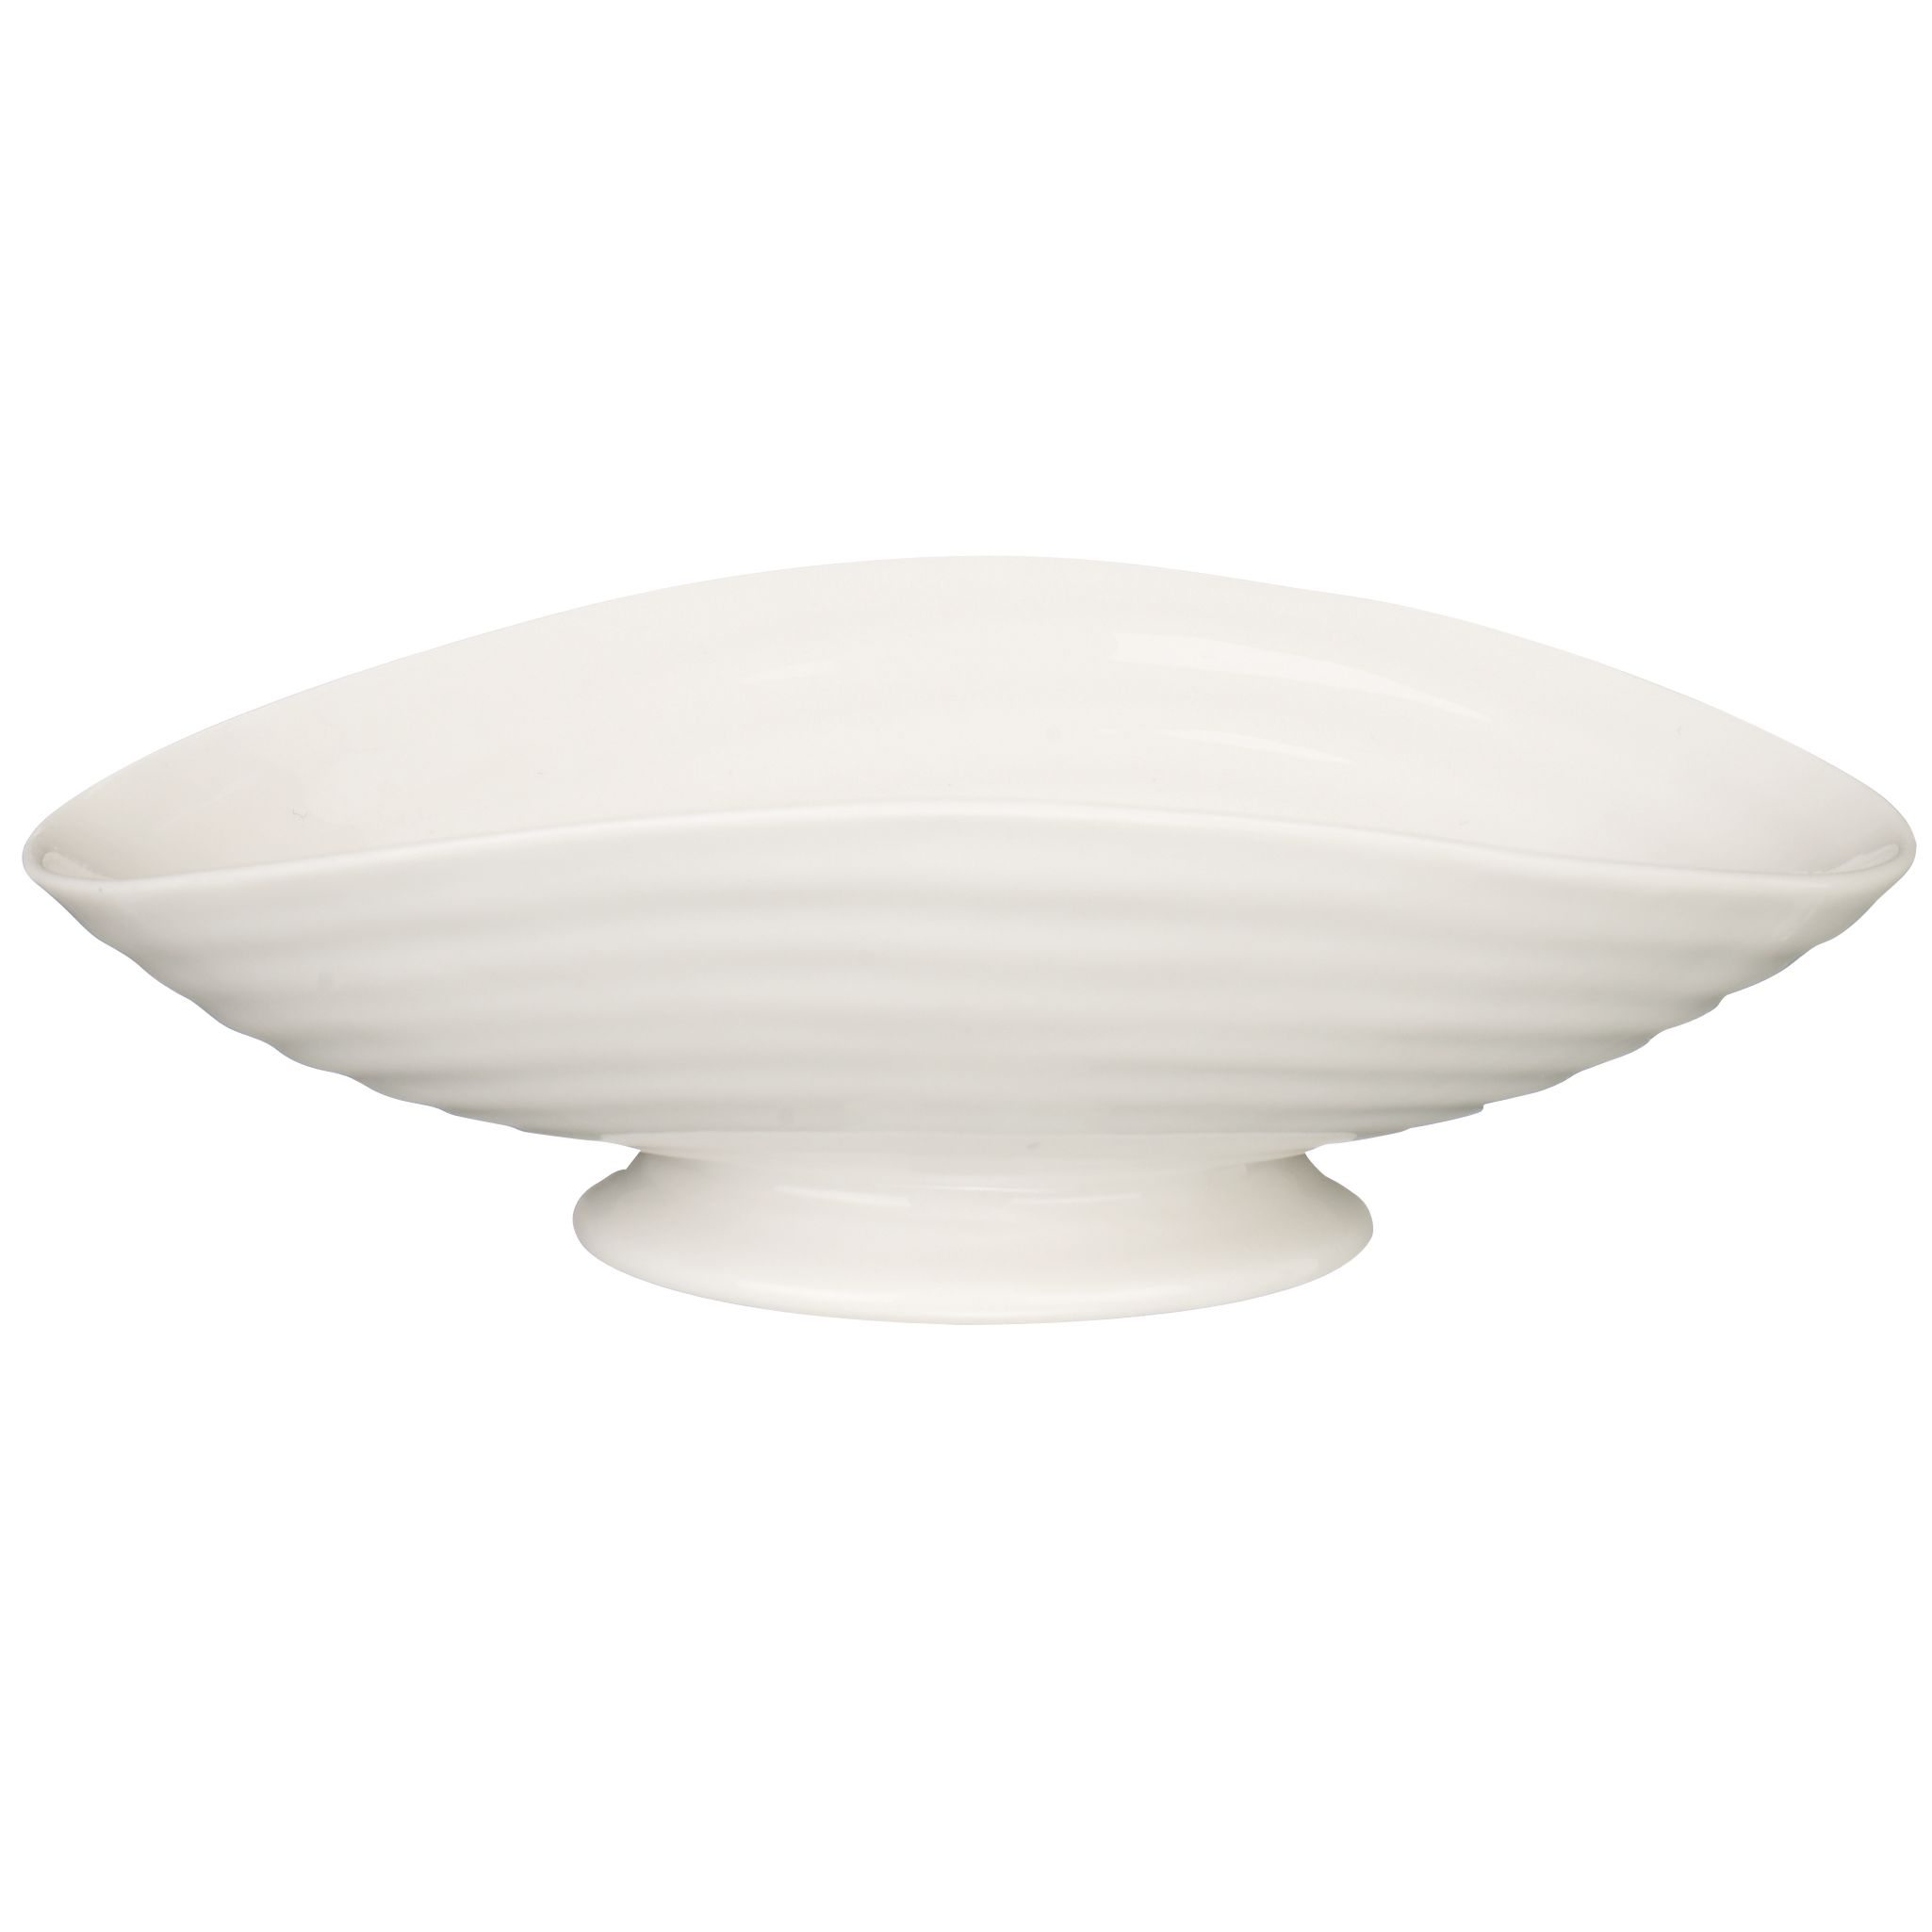 Sophie Conran Porcelain Footed Soap Dish